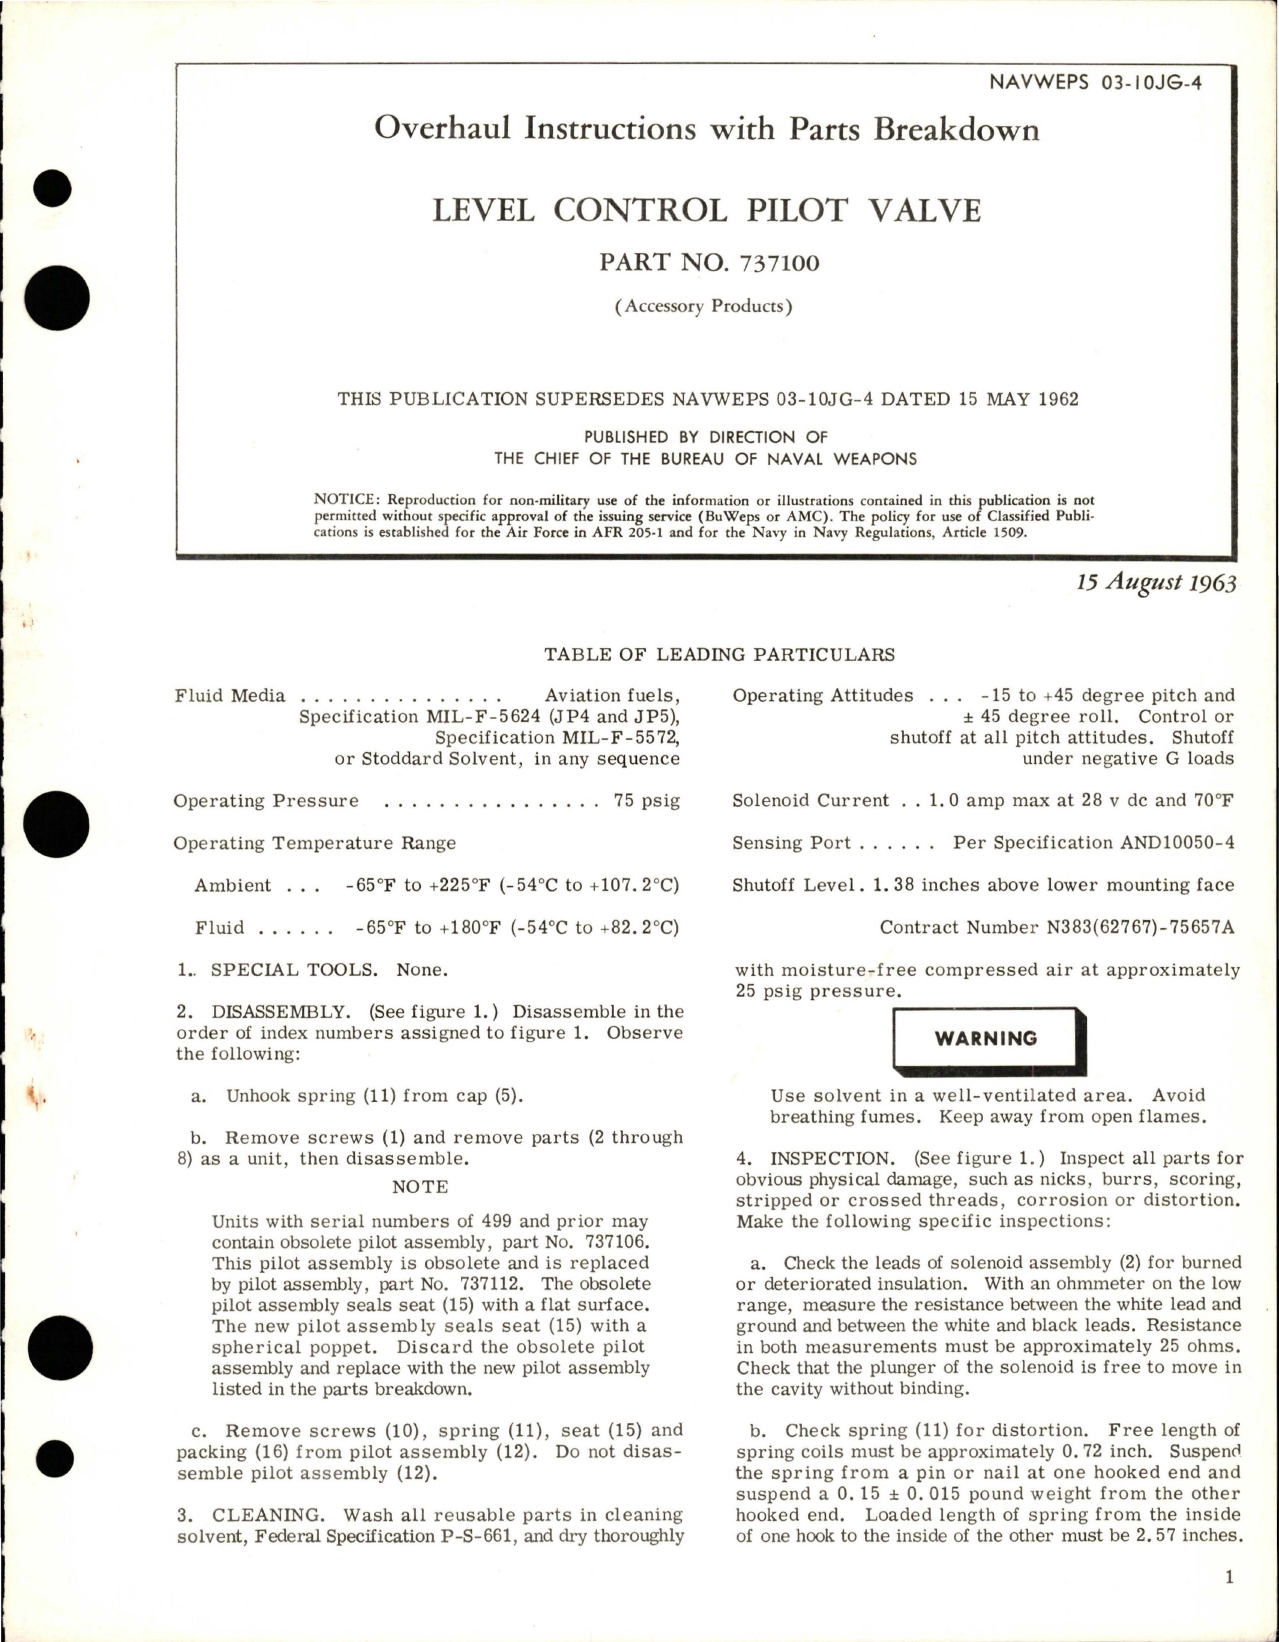 Sample page 1 from AirCorps Library document: Overhaul Instructions with Parts Breakdown for Level Control Pilot Valve - Part 737100